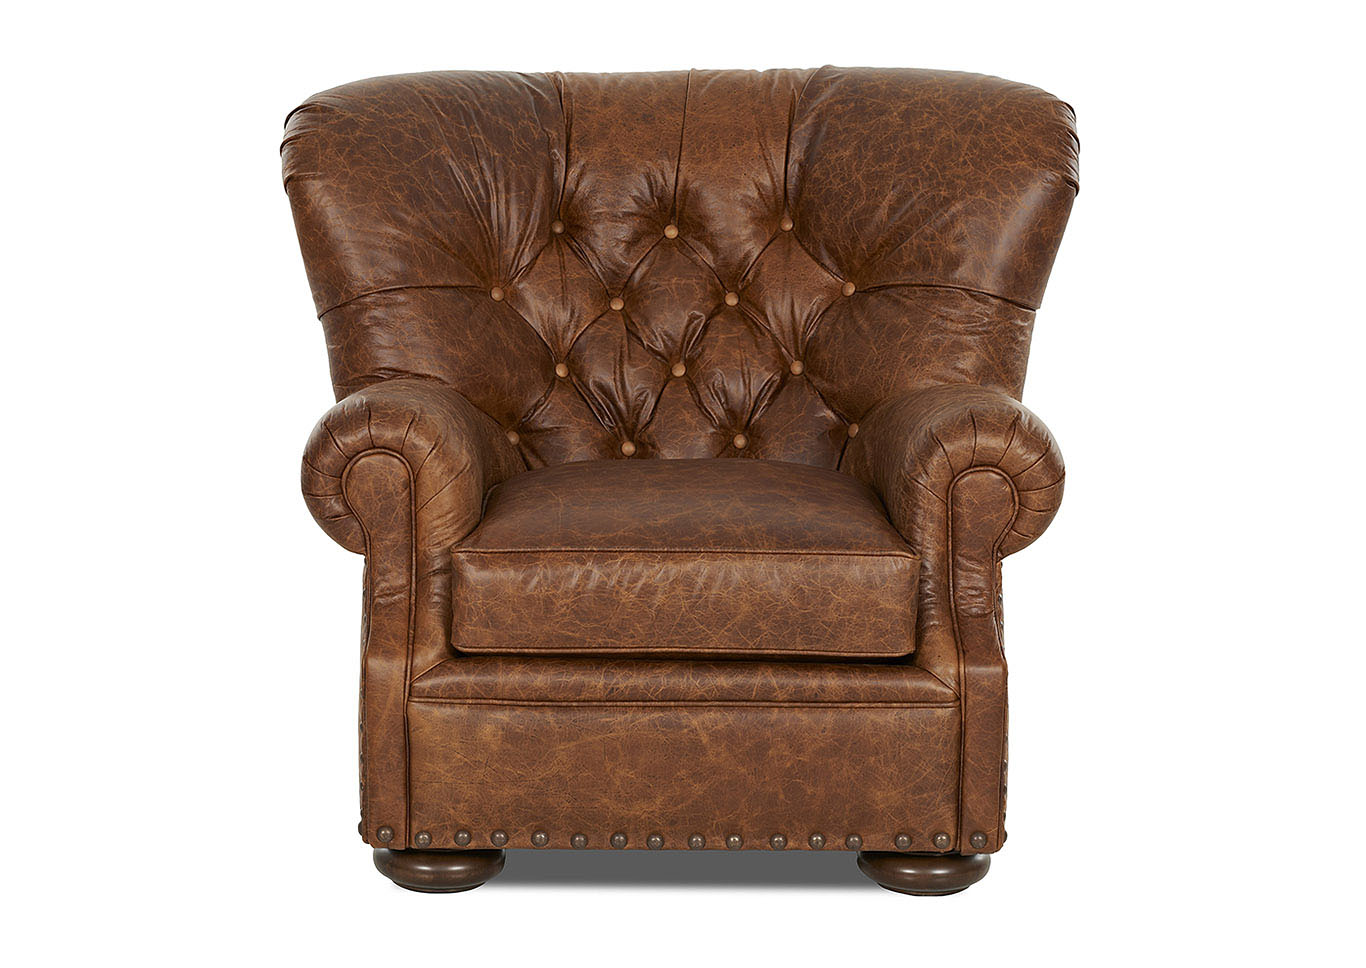 Aspen Chaps Saddle Stationary Leather, Klaussner Leather Chair